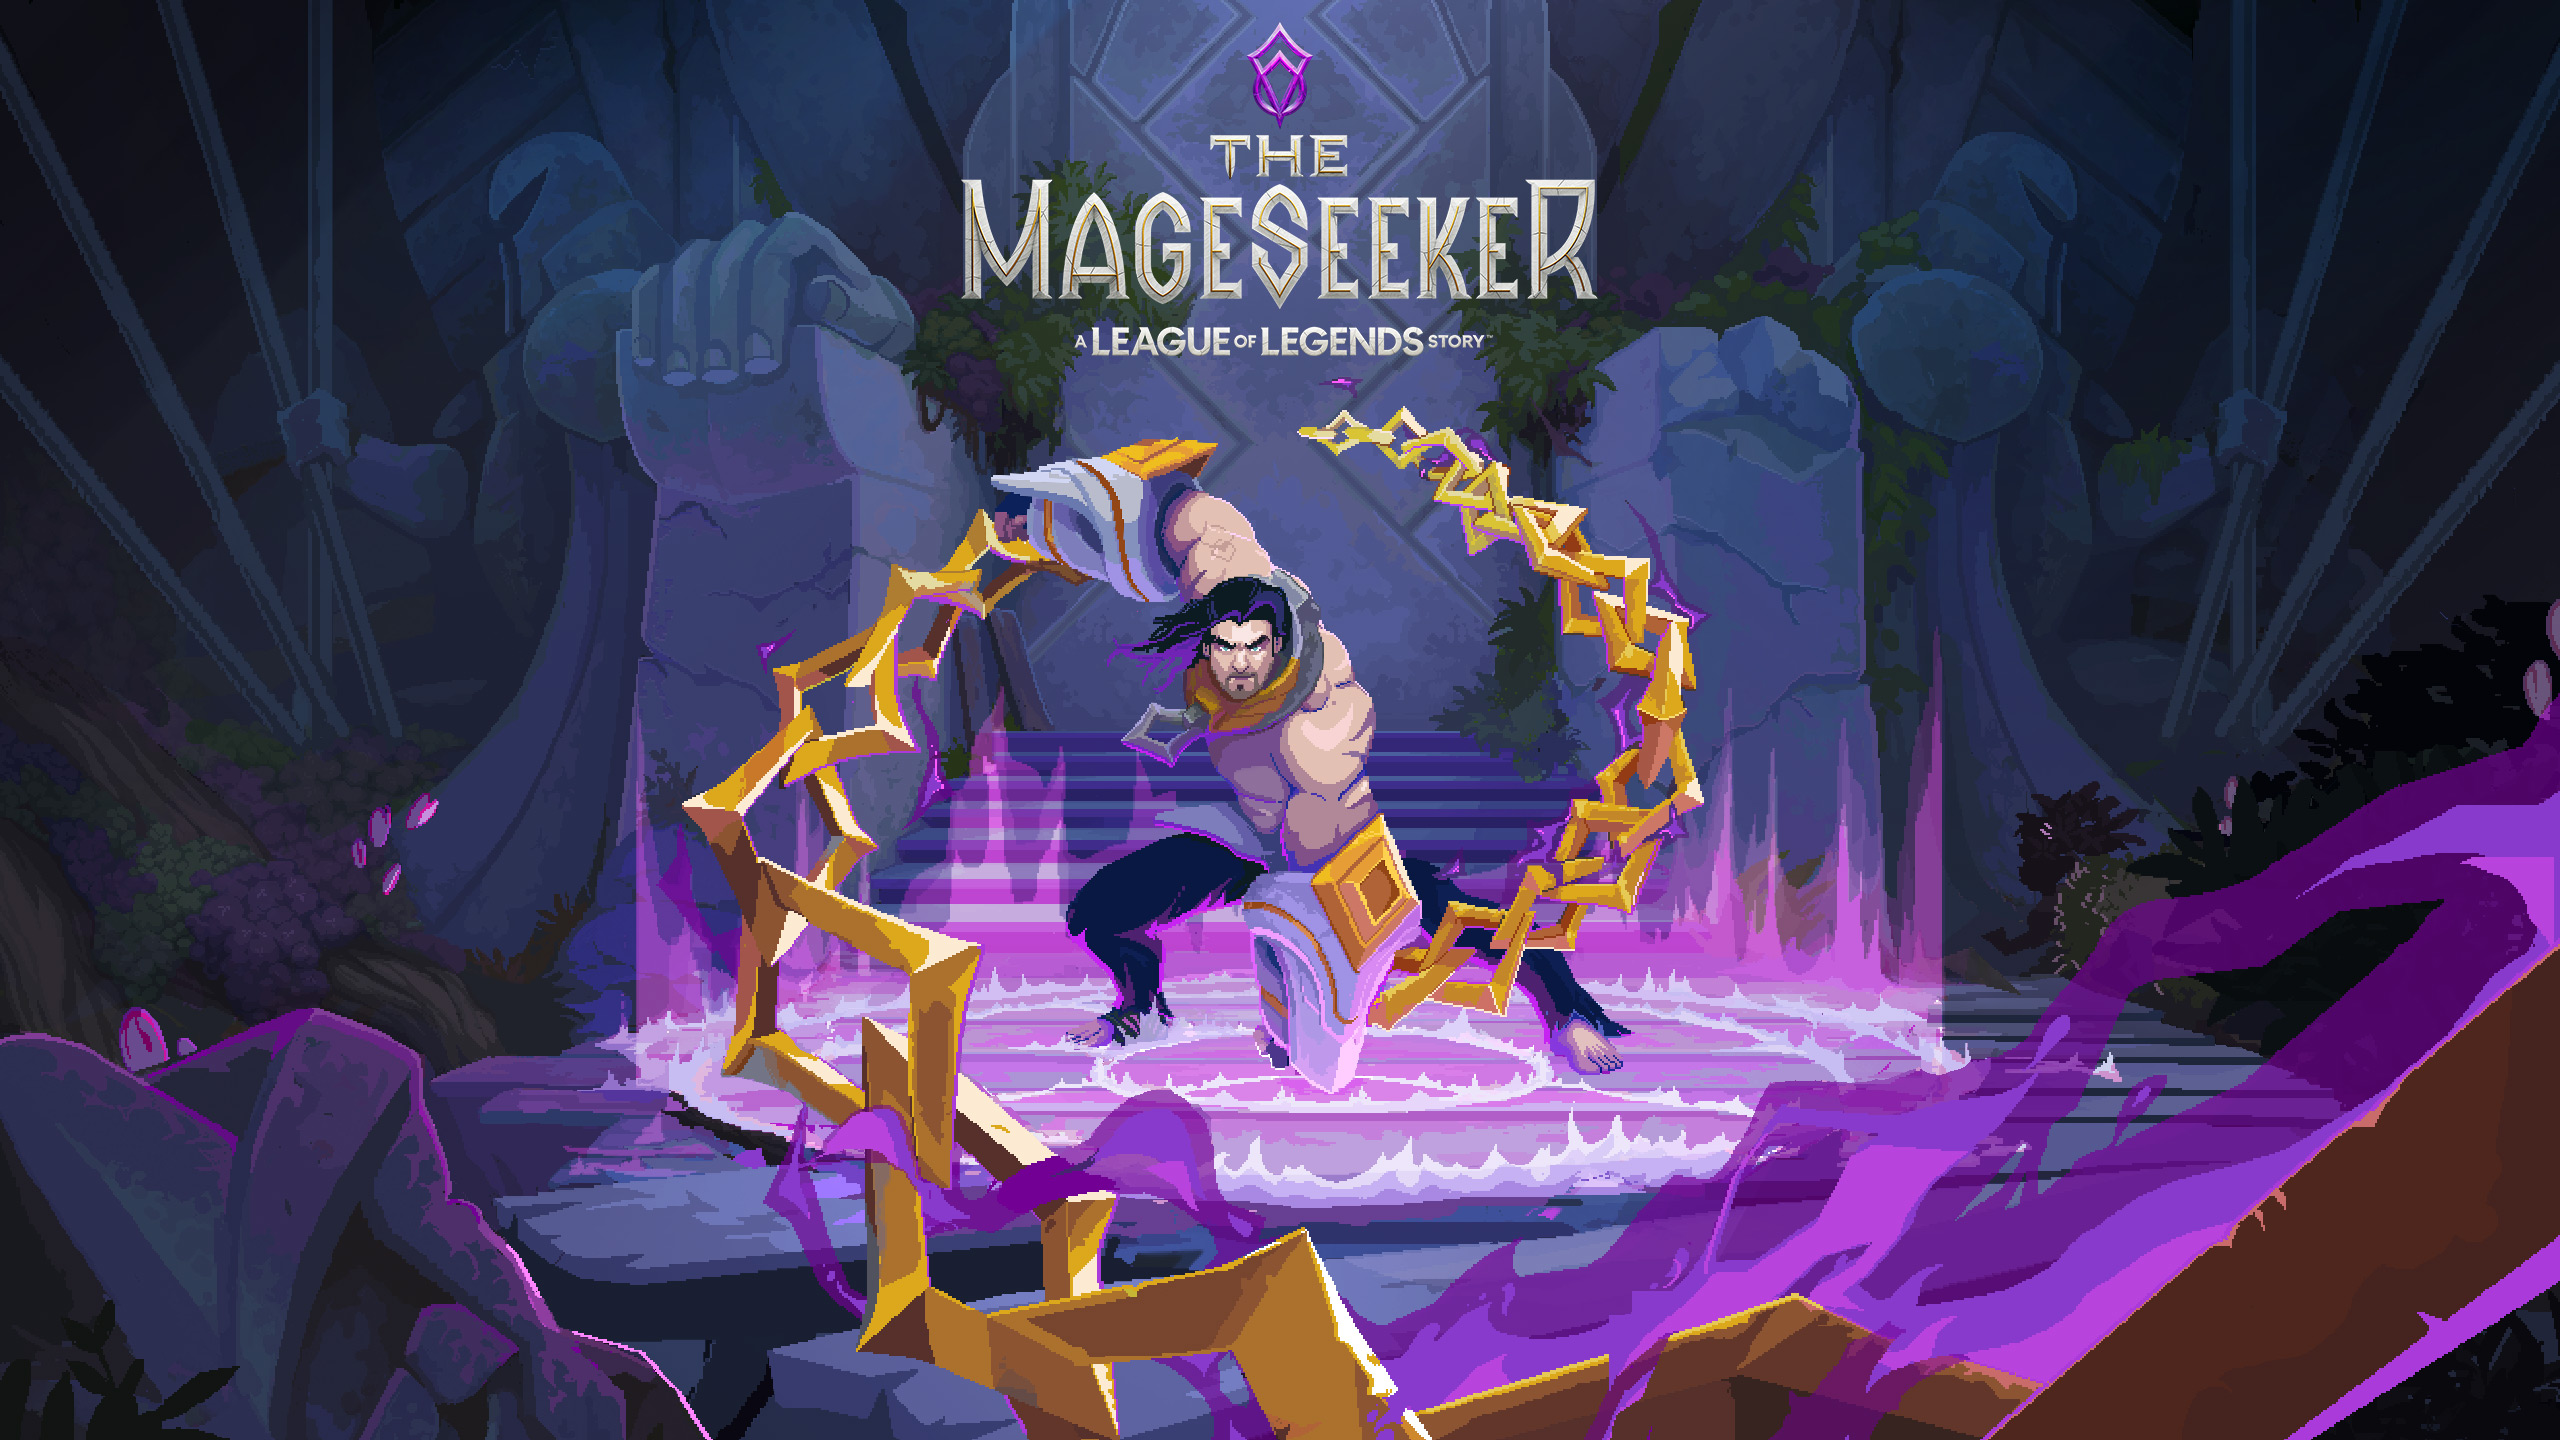 Achievement Guide - The Mageseeker: A League of Legends Story